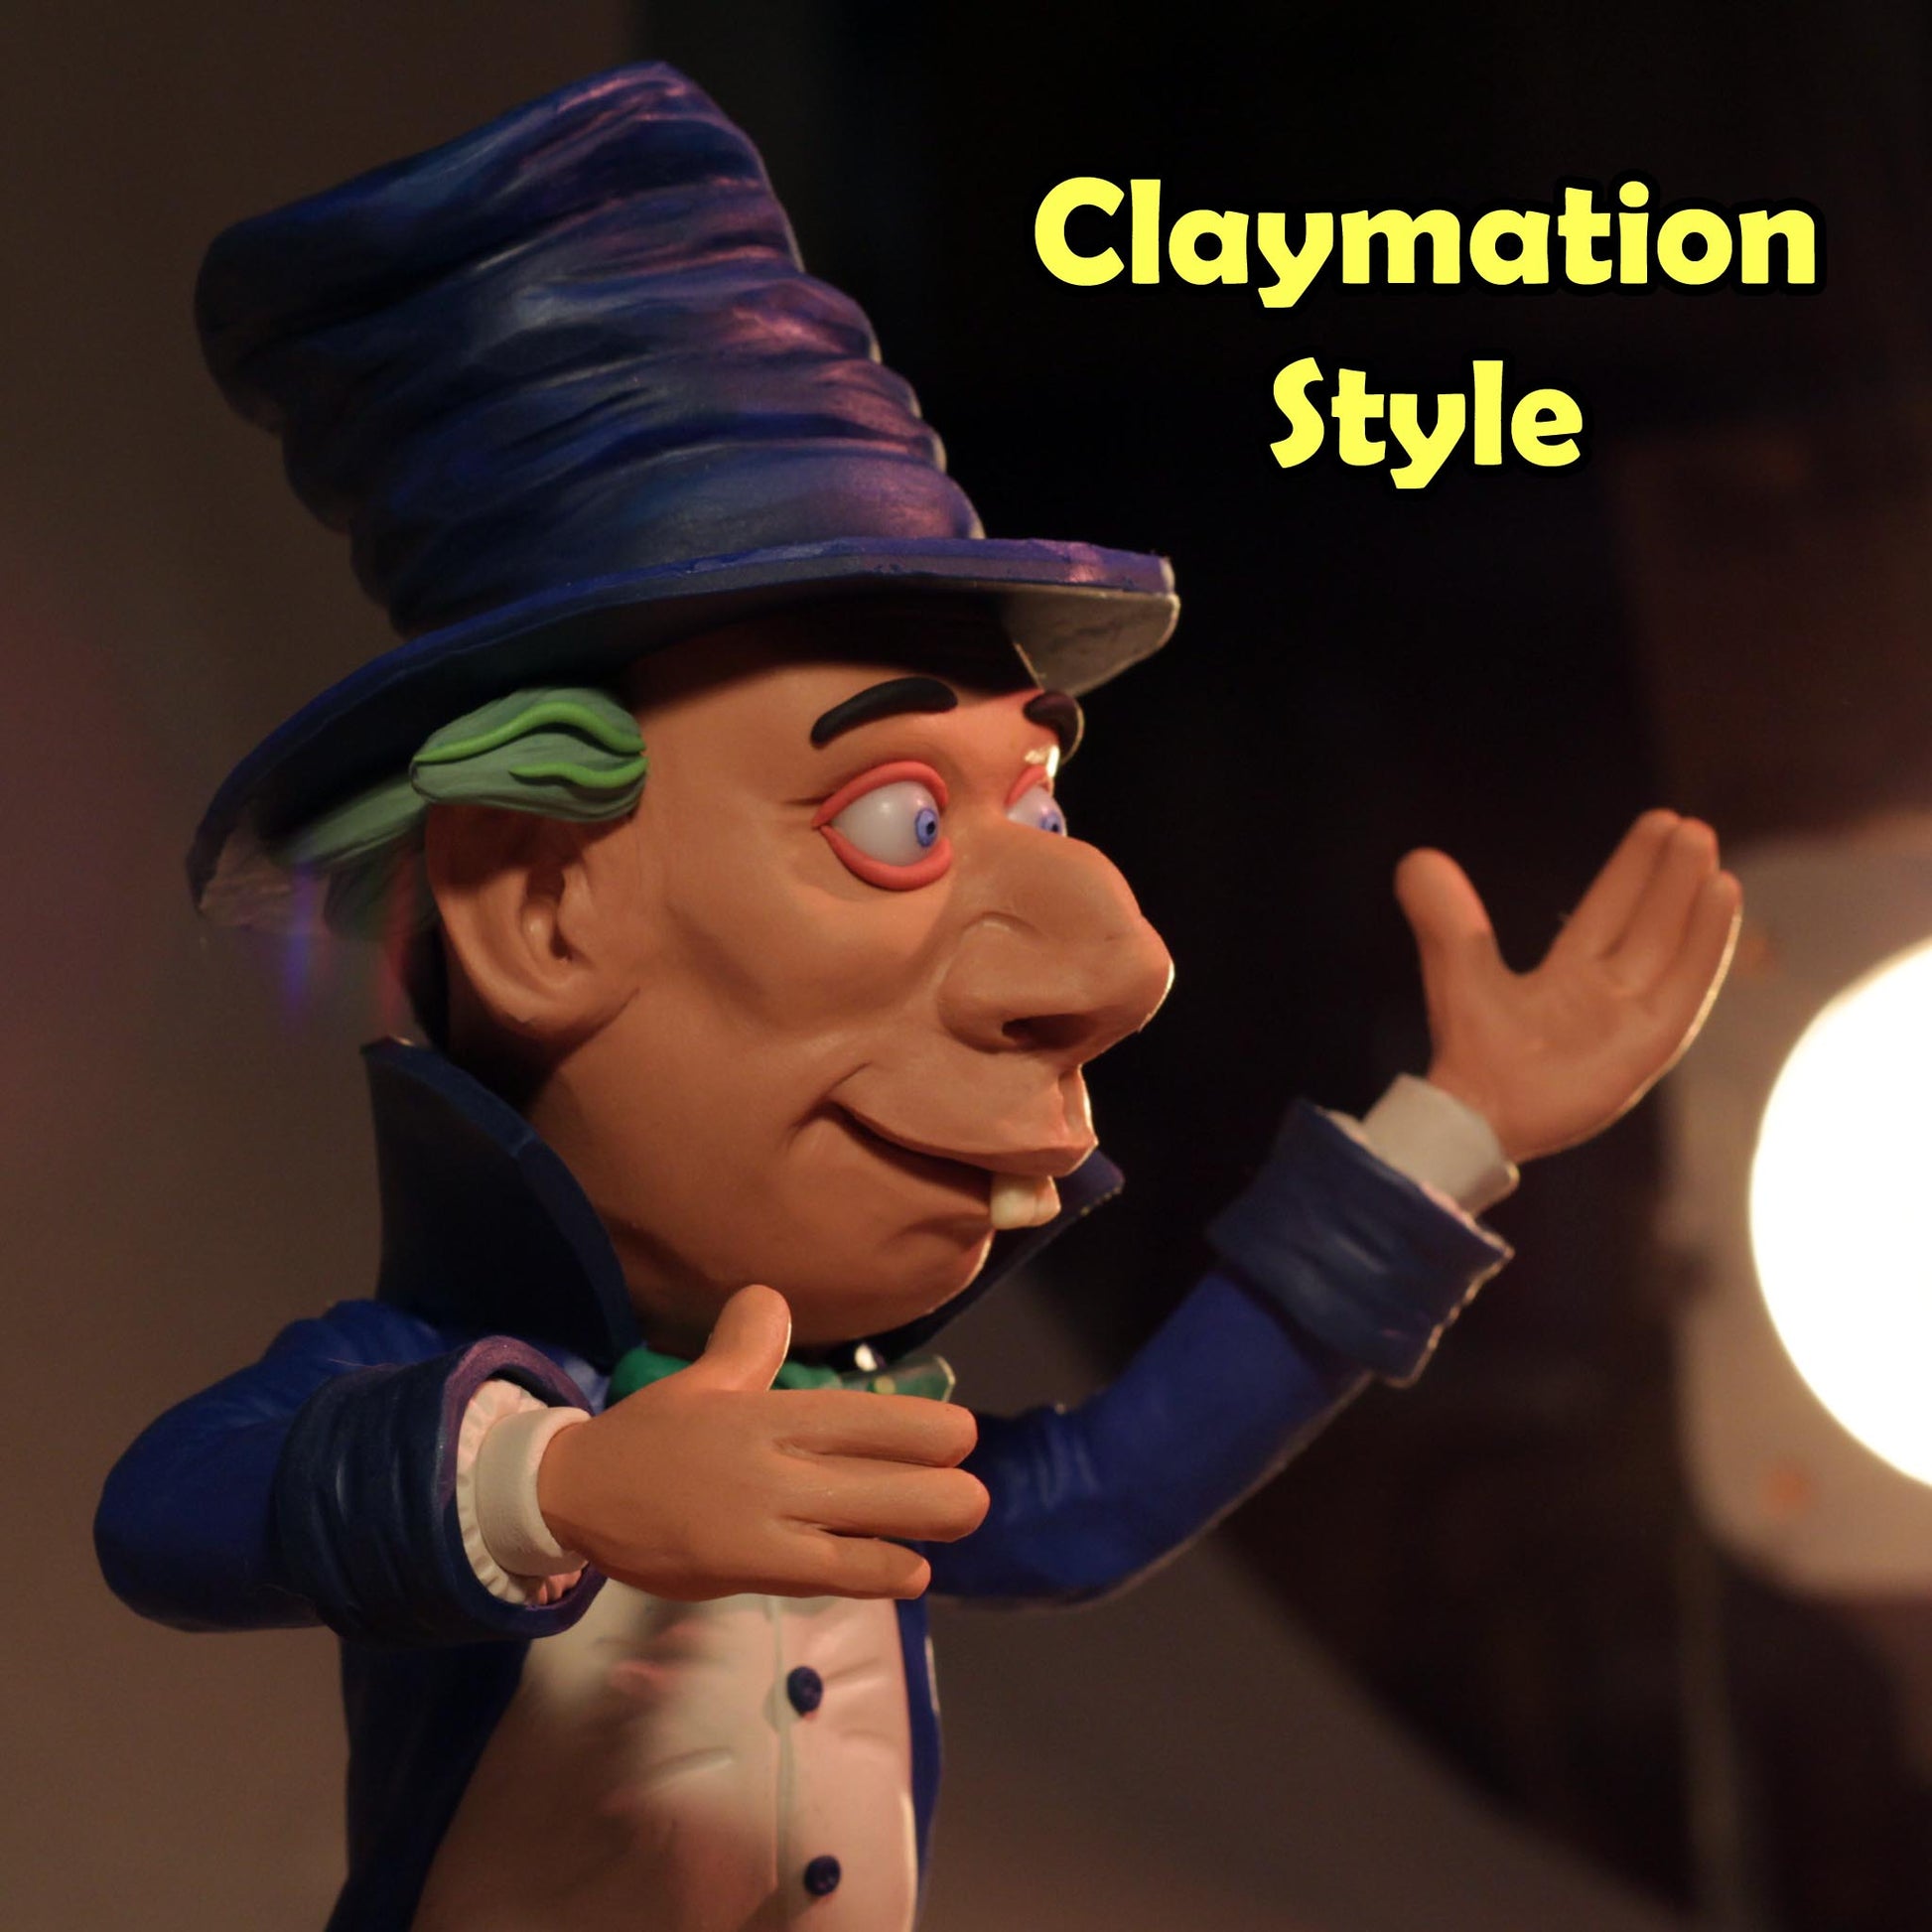 The Mad Hatter clay stop motion puppet, sculpted by Marc Spess.